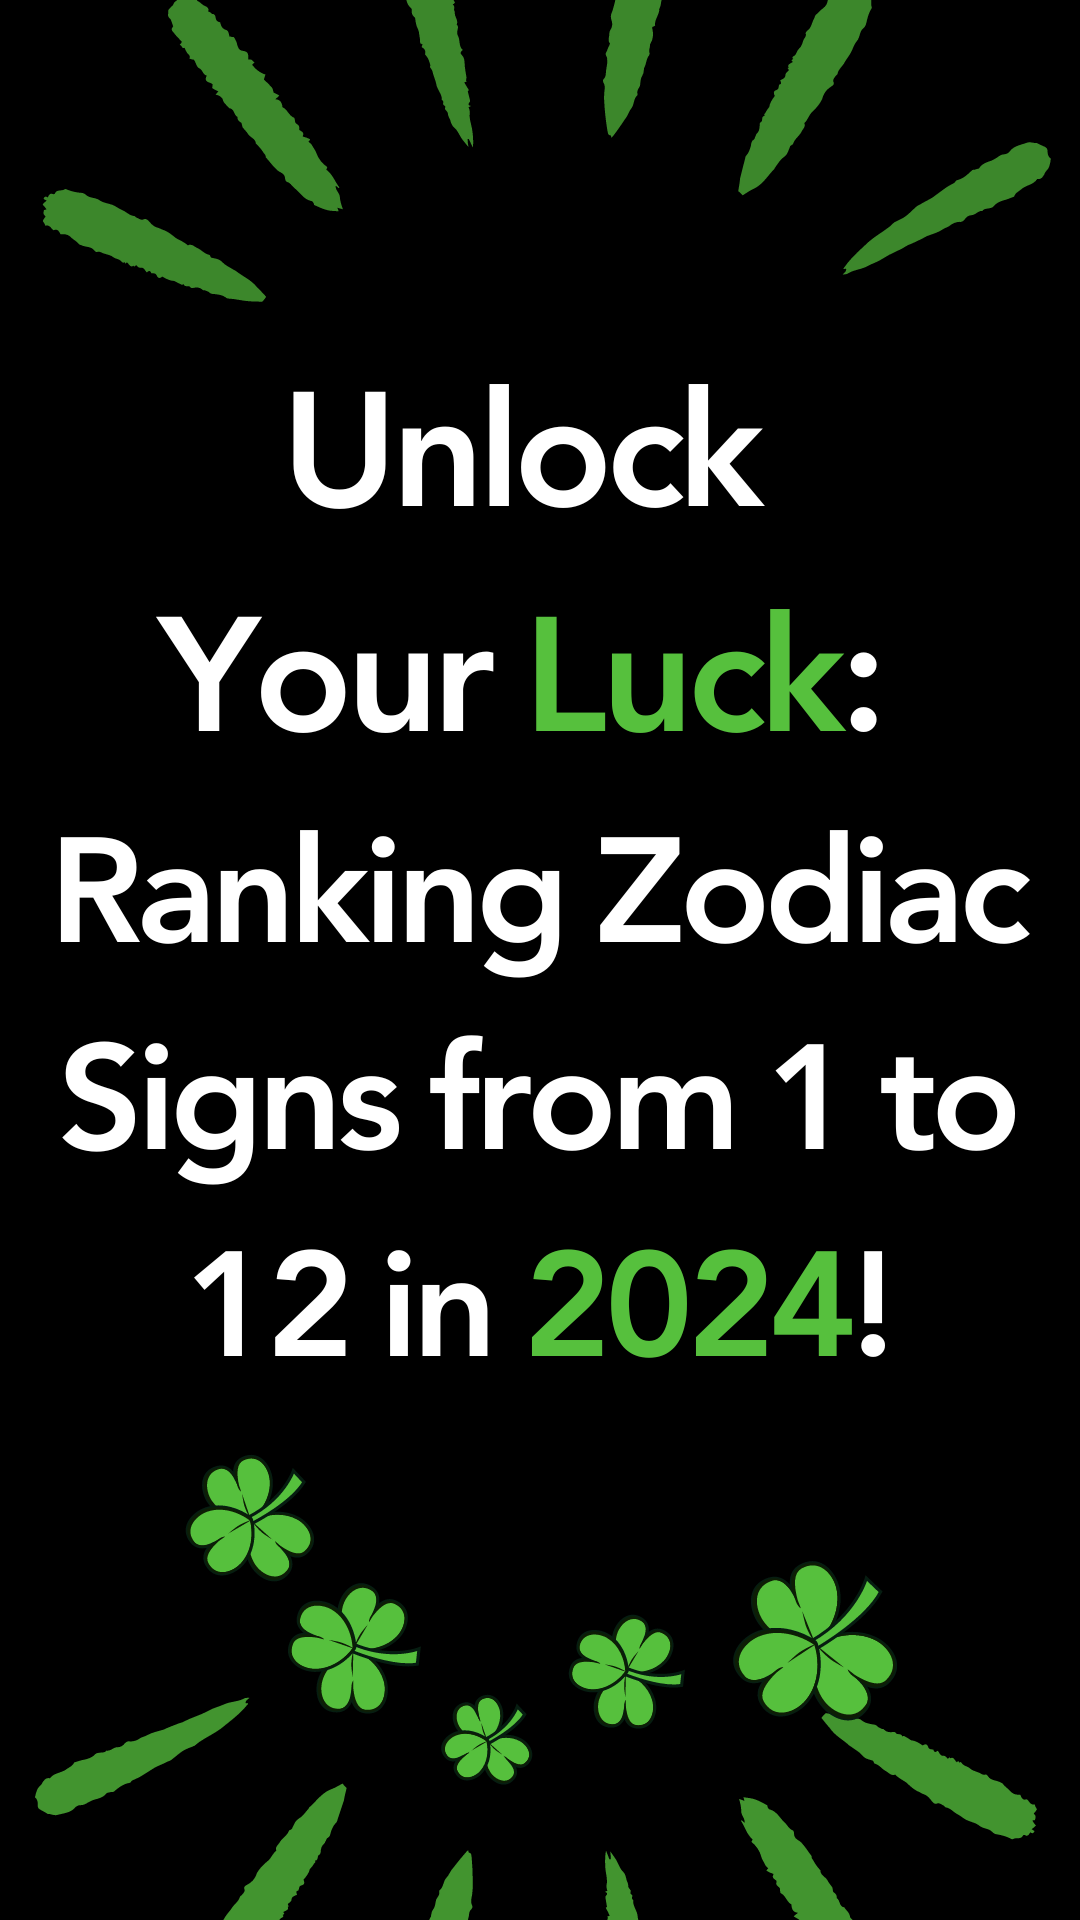 Unlock Your Luck: Ranking Zodiac Signs from 1 to 12 in 2024!